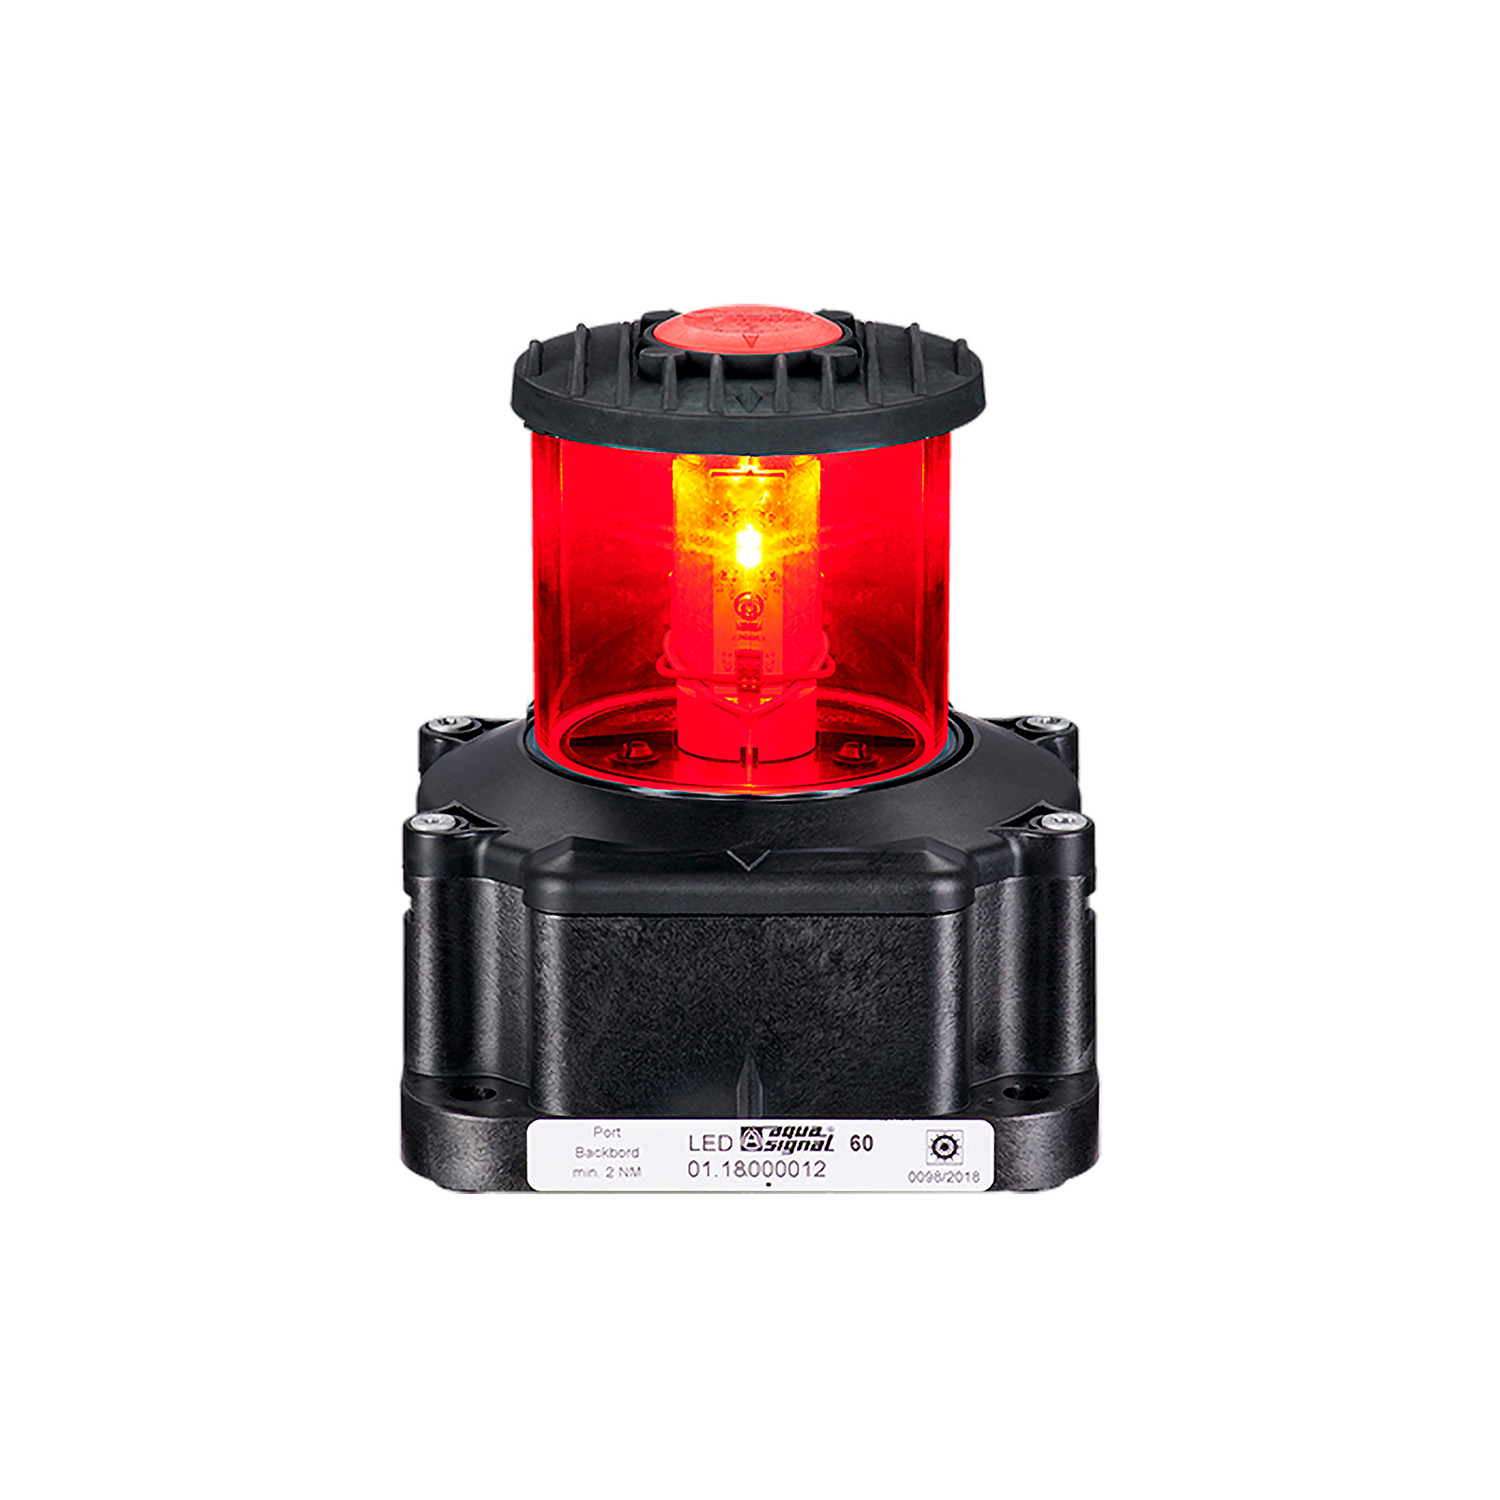 3665205000 Signal red, Series S60 LED 2nm, 115-230VAC